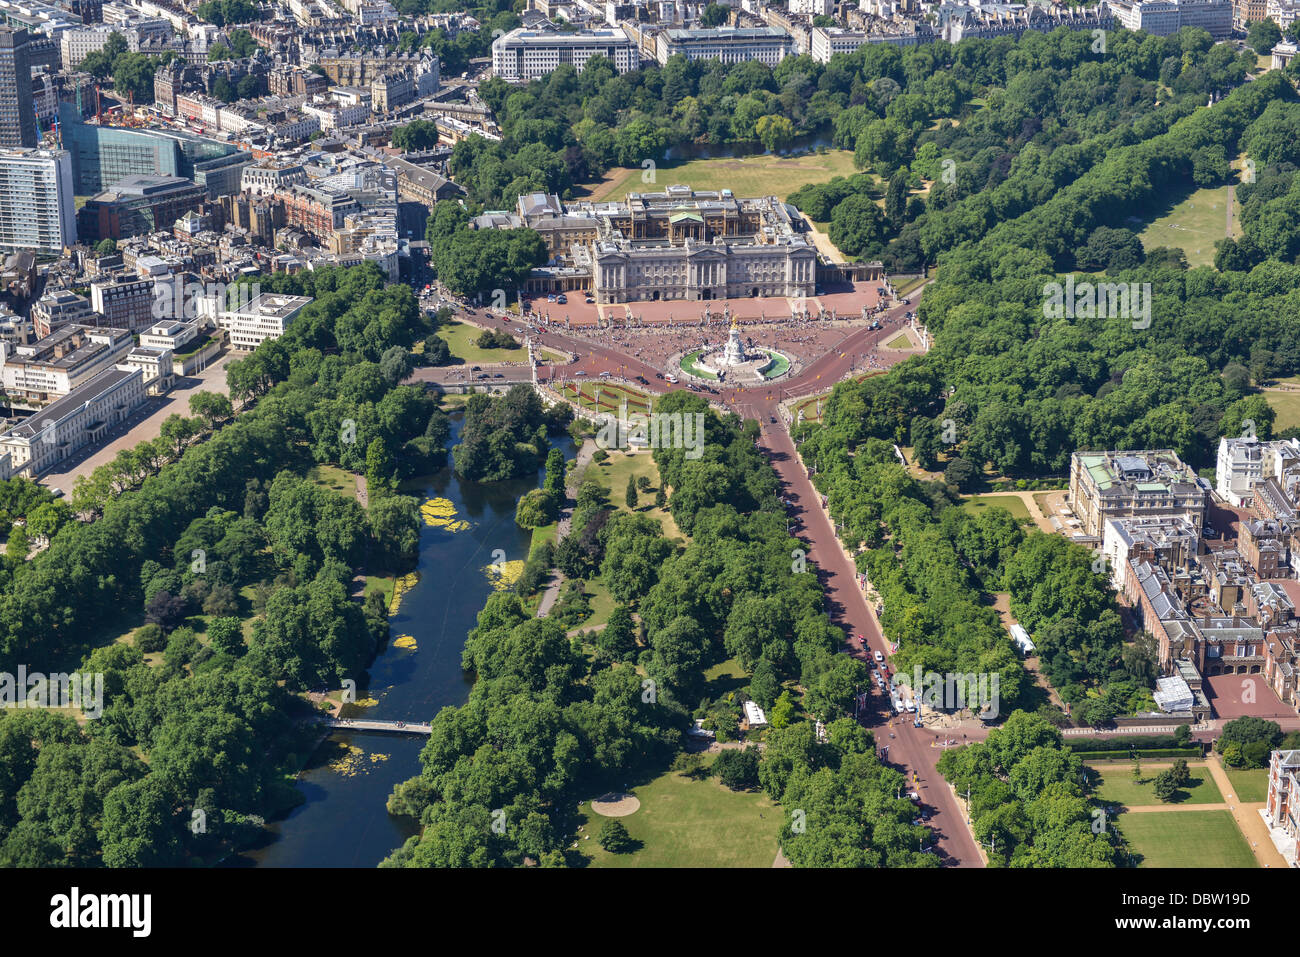 Aerial photograph of Buckingham Palace, The Mall and St James' Park Stock Photo